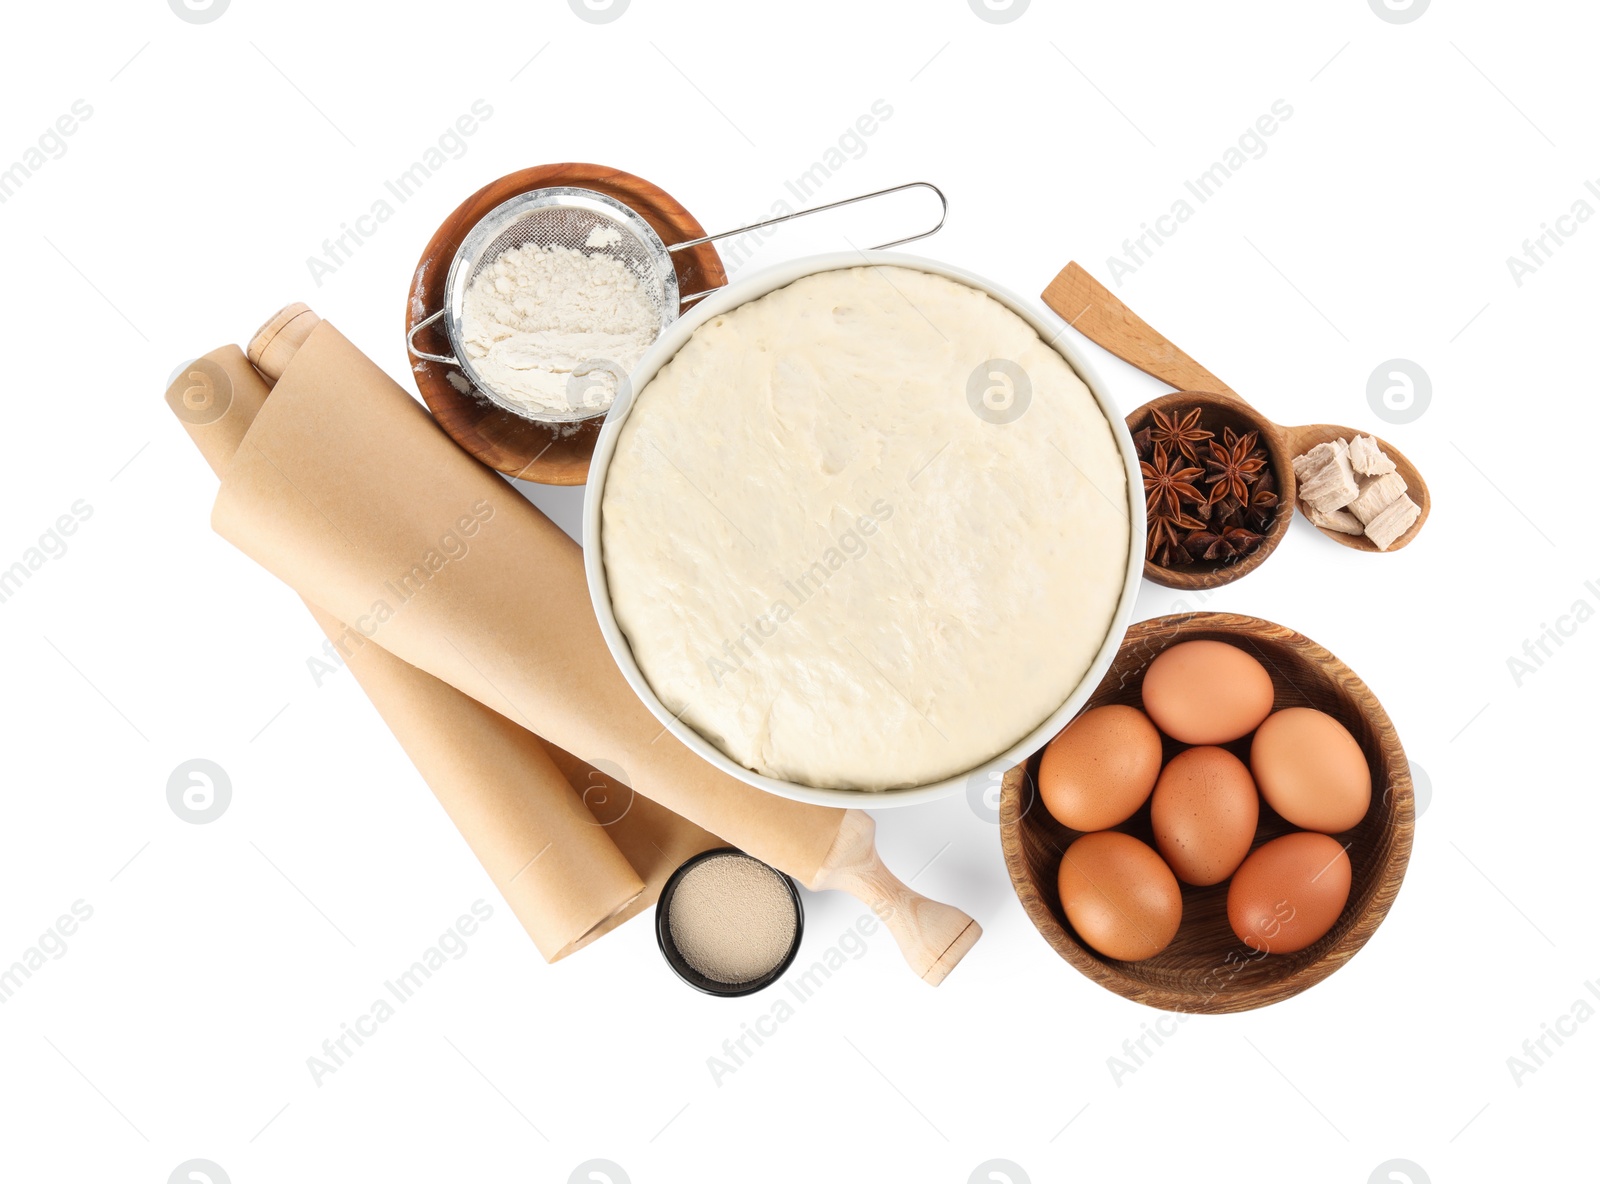 Photo of Composition with fresh yeast dough, parchment paper and ingredients on white background, top view. Making cake